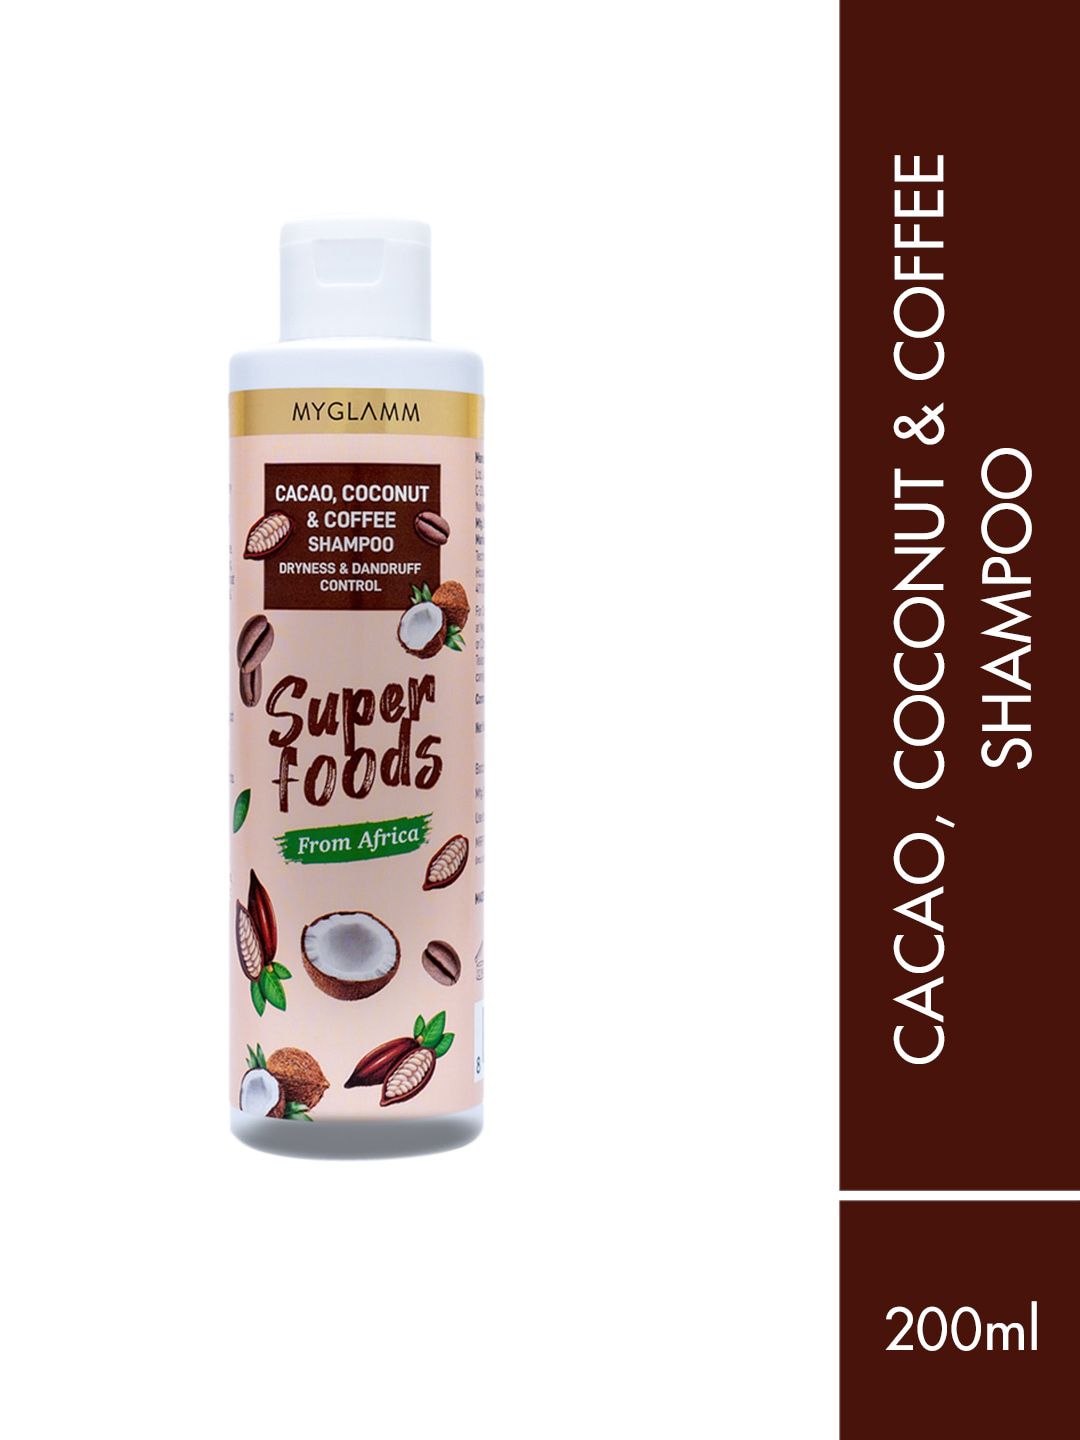 MyGlamm Superfoods Cacao Coconut & Coffee Shampoo 200 ml Price in India